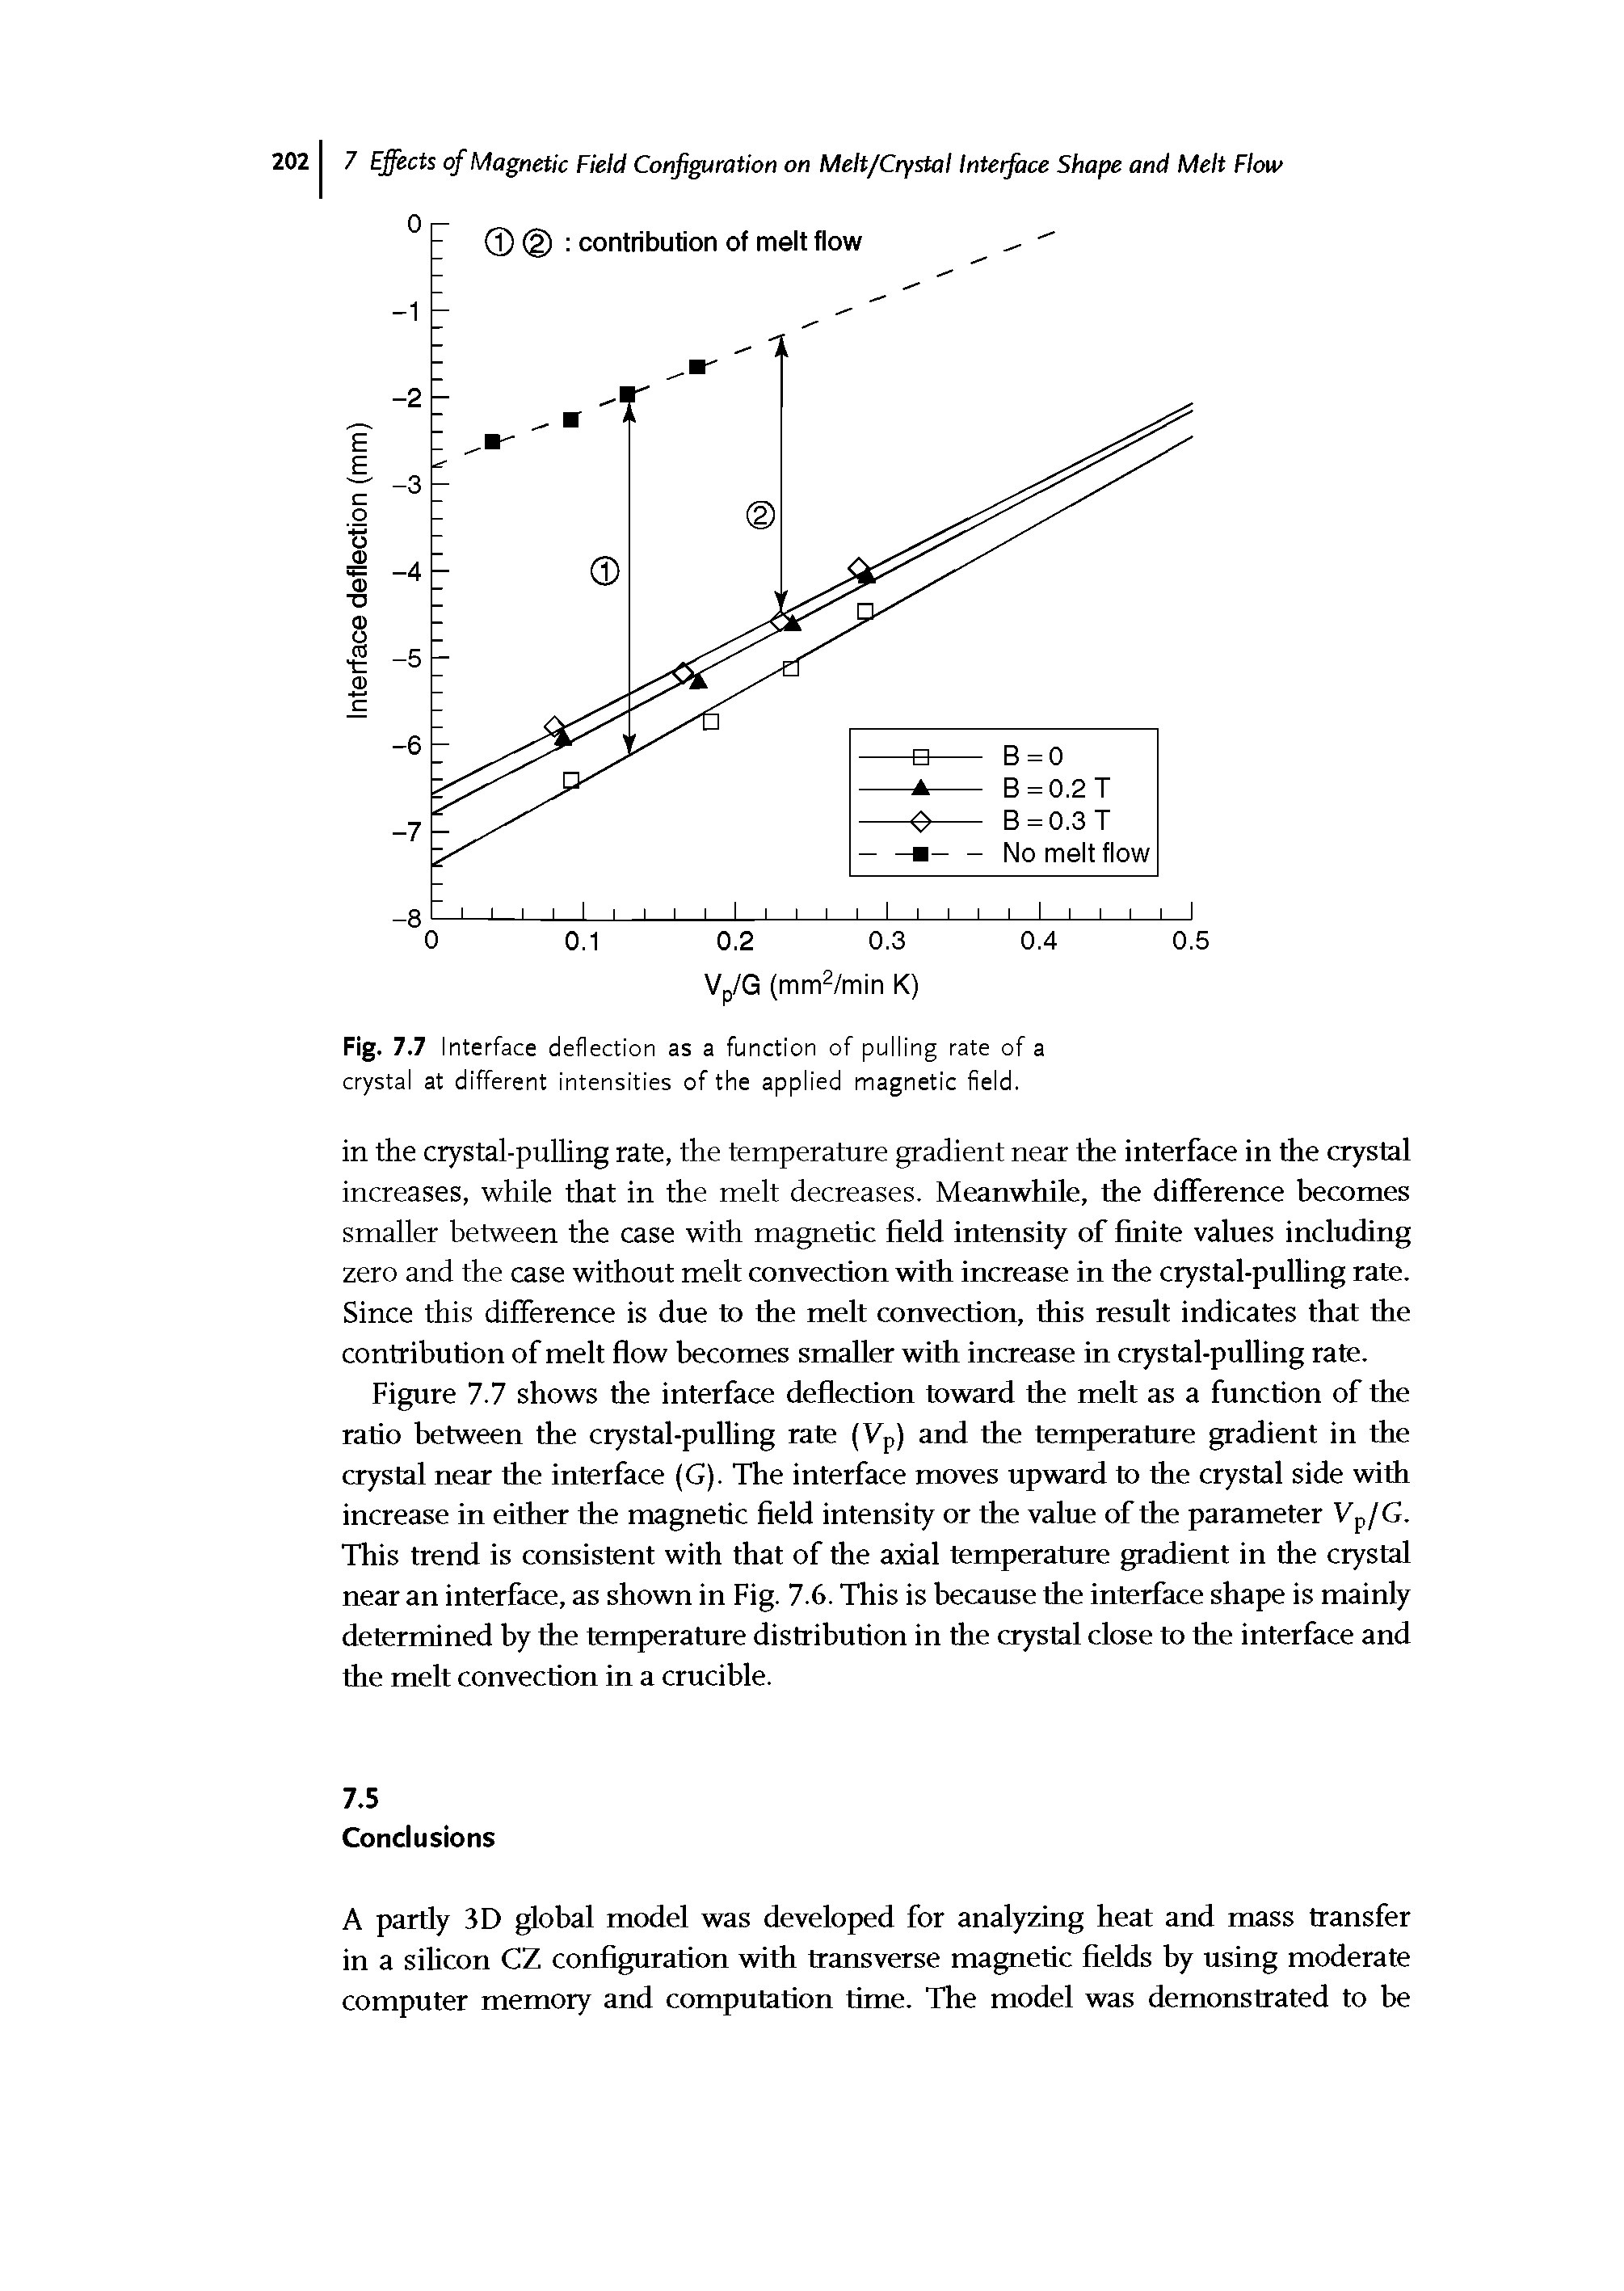 Figure 7.7 shows the interface deflection toward the melt as a function of the ratio between the crystal-pulling rate (Vp) and the temperature gradient in the crystal near the interface (G). The interface moves upward to the crystal side with increase in either the magnetic field intensity or the value of the parameter Vp/G. This trend is consistent with that of the axial temperature gradient in the crystal near an interface, as shown in Fig. 7.6. This is because the interface shape is mainly determined by the temperature distribution in the crystal close to the interface and the melt convection in a crucible.